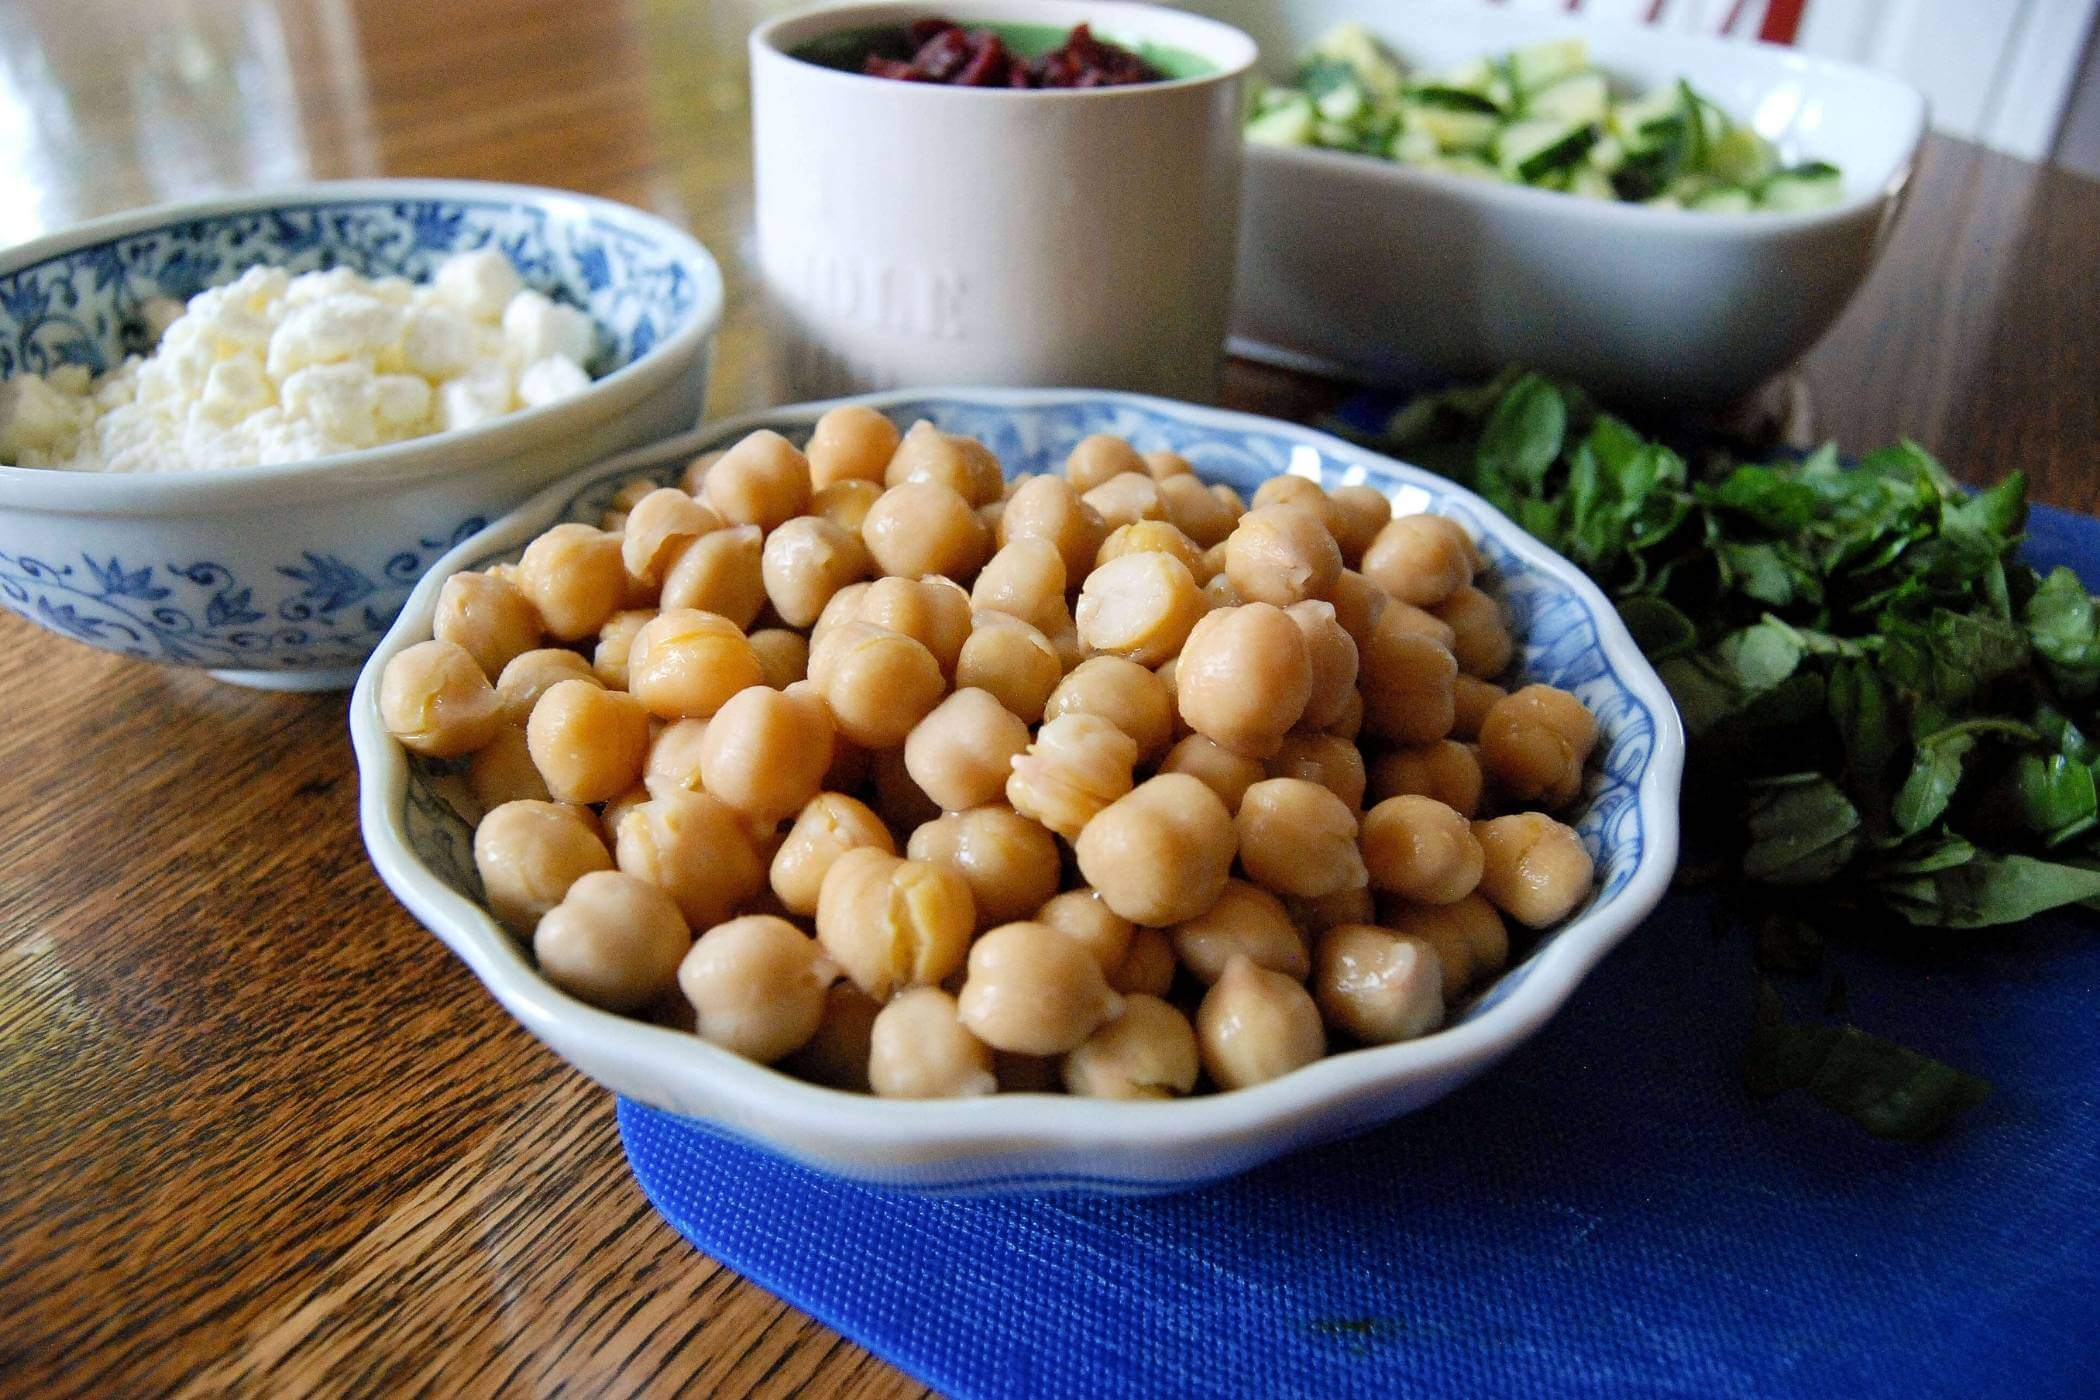 bowl of chickpeas on table surrounded by other salad ingredients.